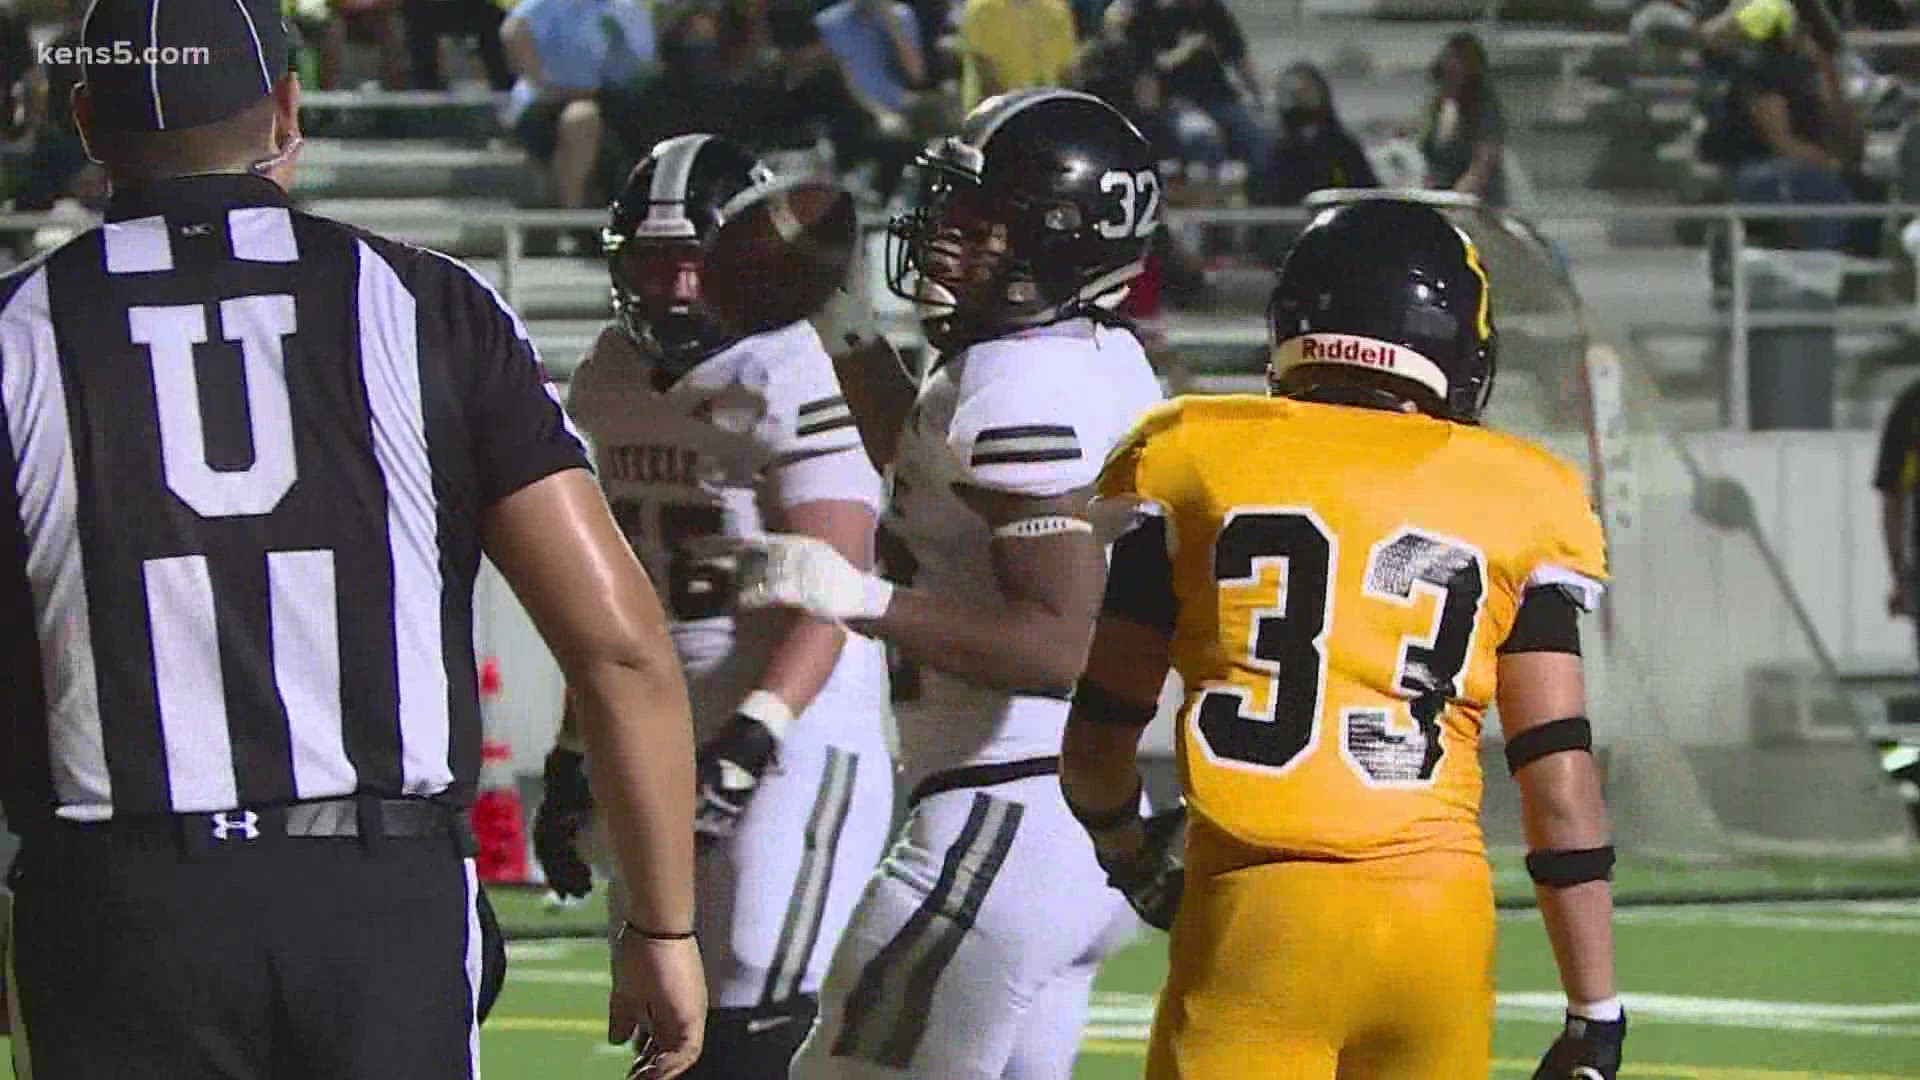 Steele held East Central to just 6 points and Brandeis routed MacArthur in Friday night's gridiron action.